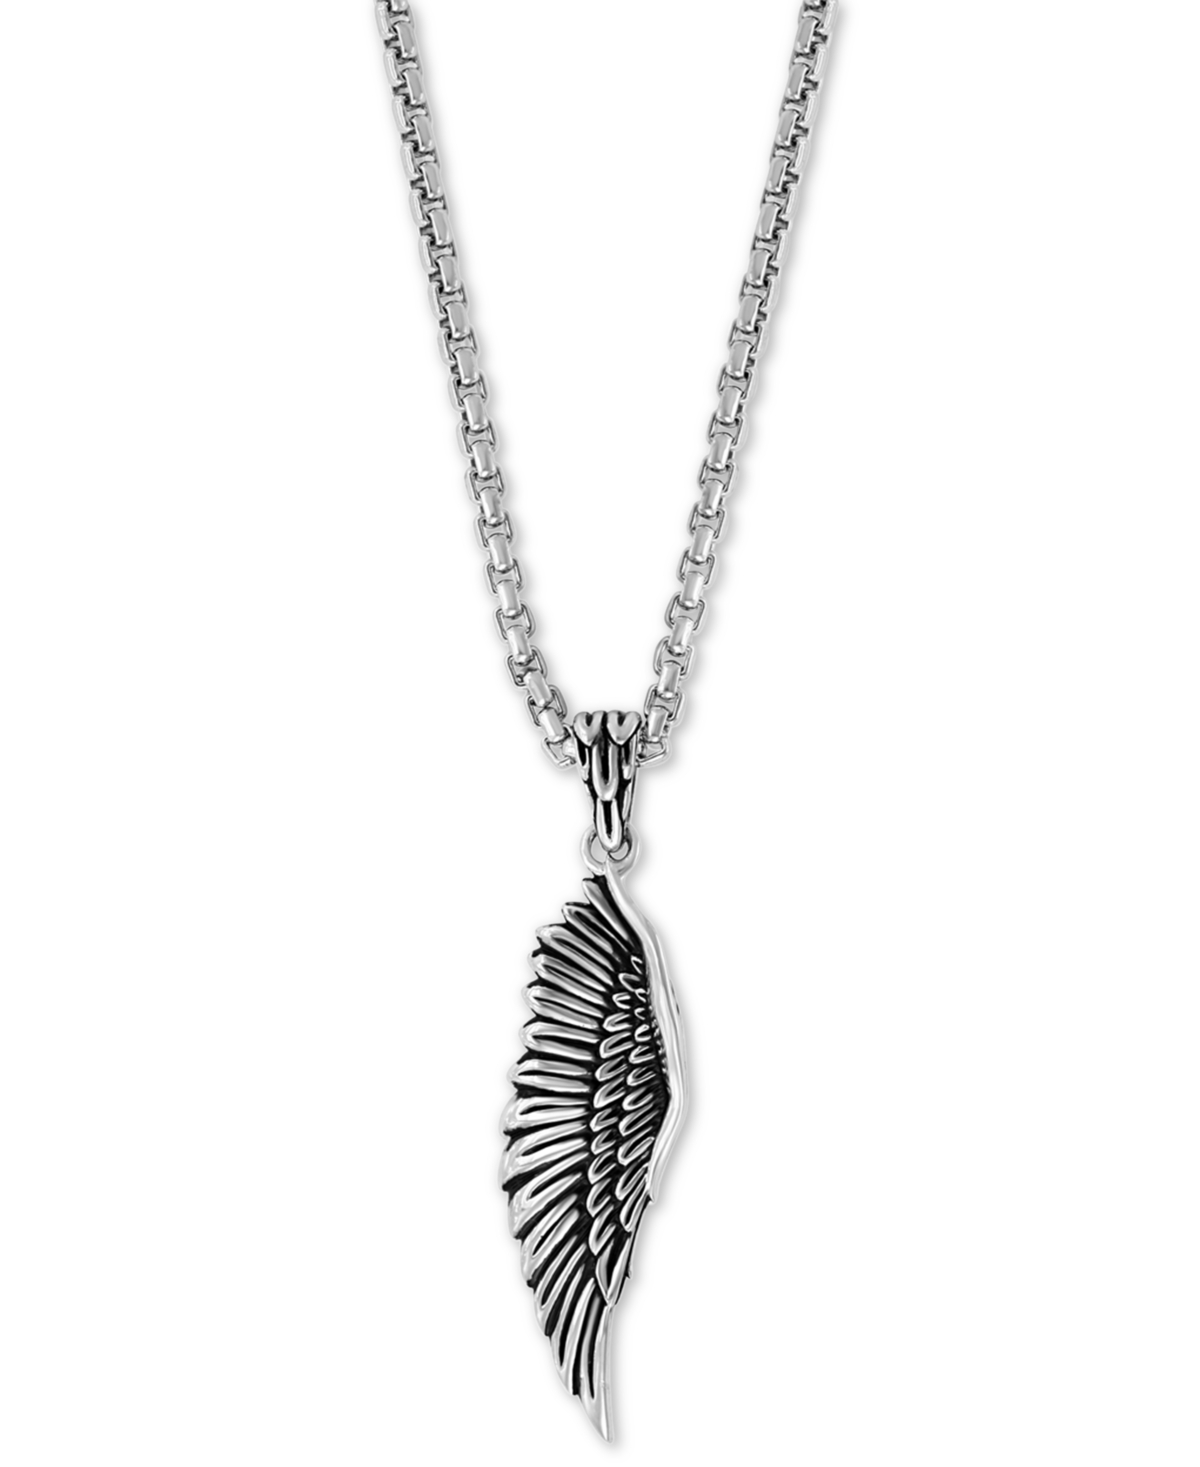 Effy Men's Wing 22" Pendant Necklace in Sterling Silver - Silver